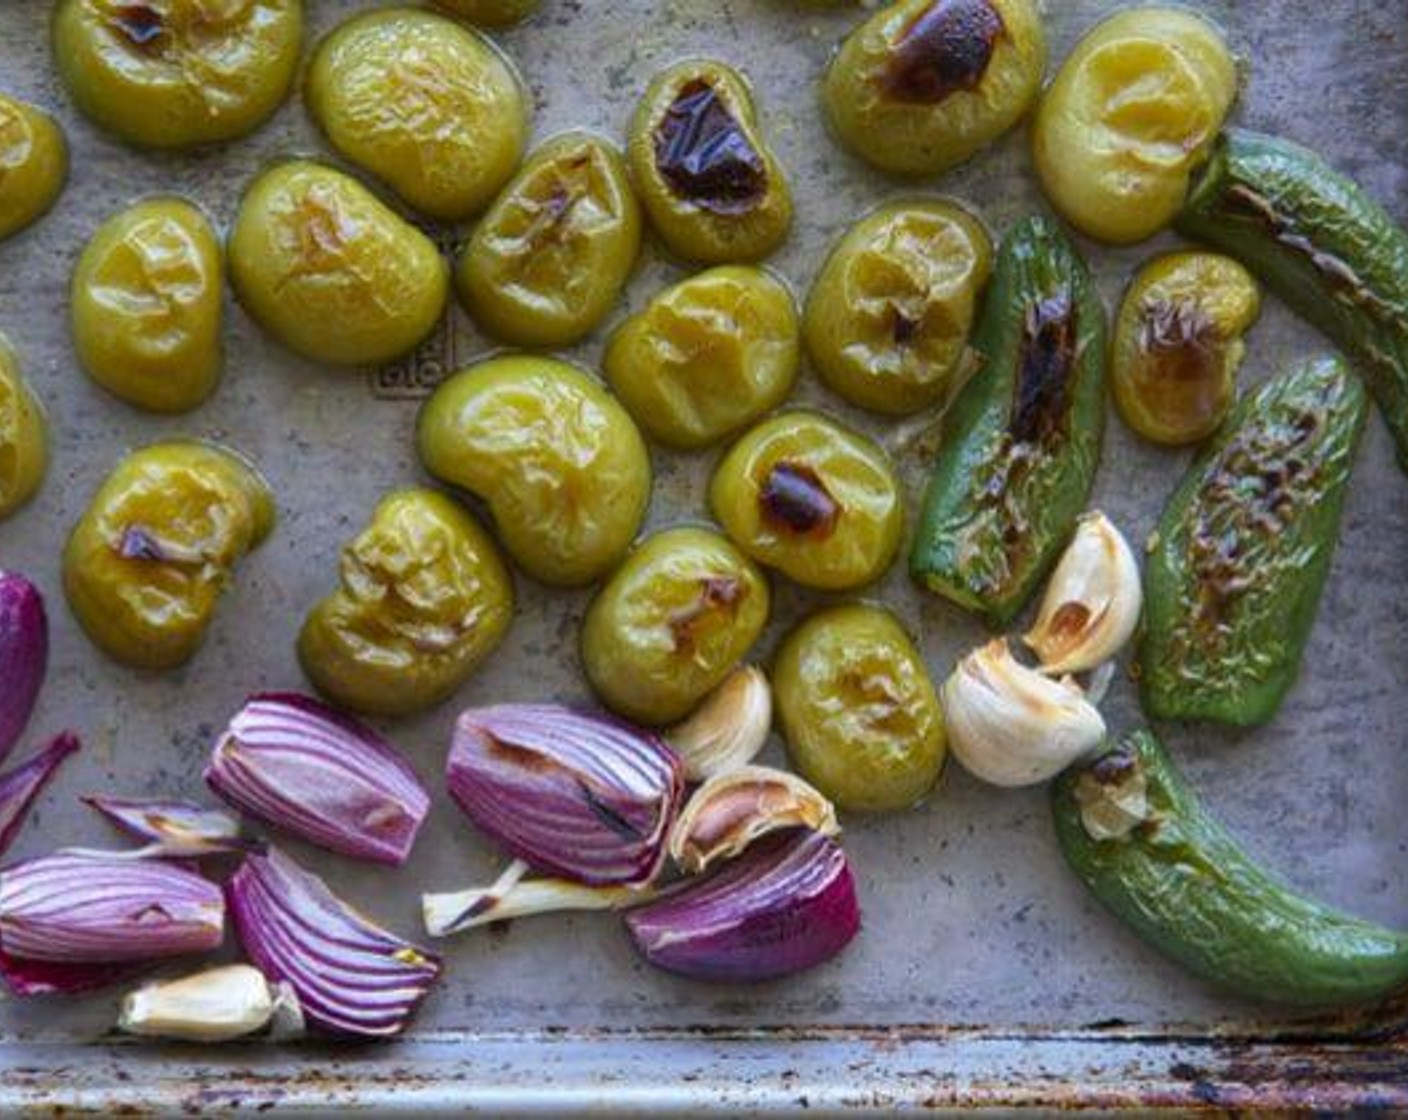 step 1 Add your Tomatillos (1.5 lb), Jalapeño Peppers (2), Yellow Onion (1), and Garlic (1/2 bulb) to a sheet pan. Lightly drizzle oil and sprinkle with Salt (to taste) and Ground Black Pepper (to taste).